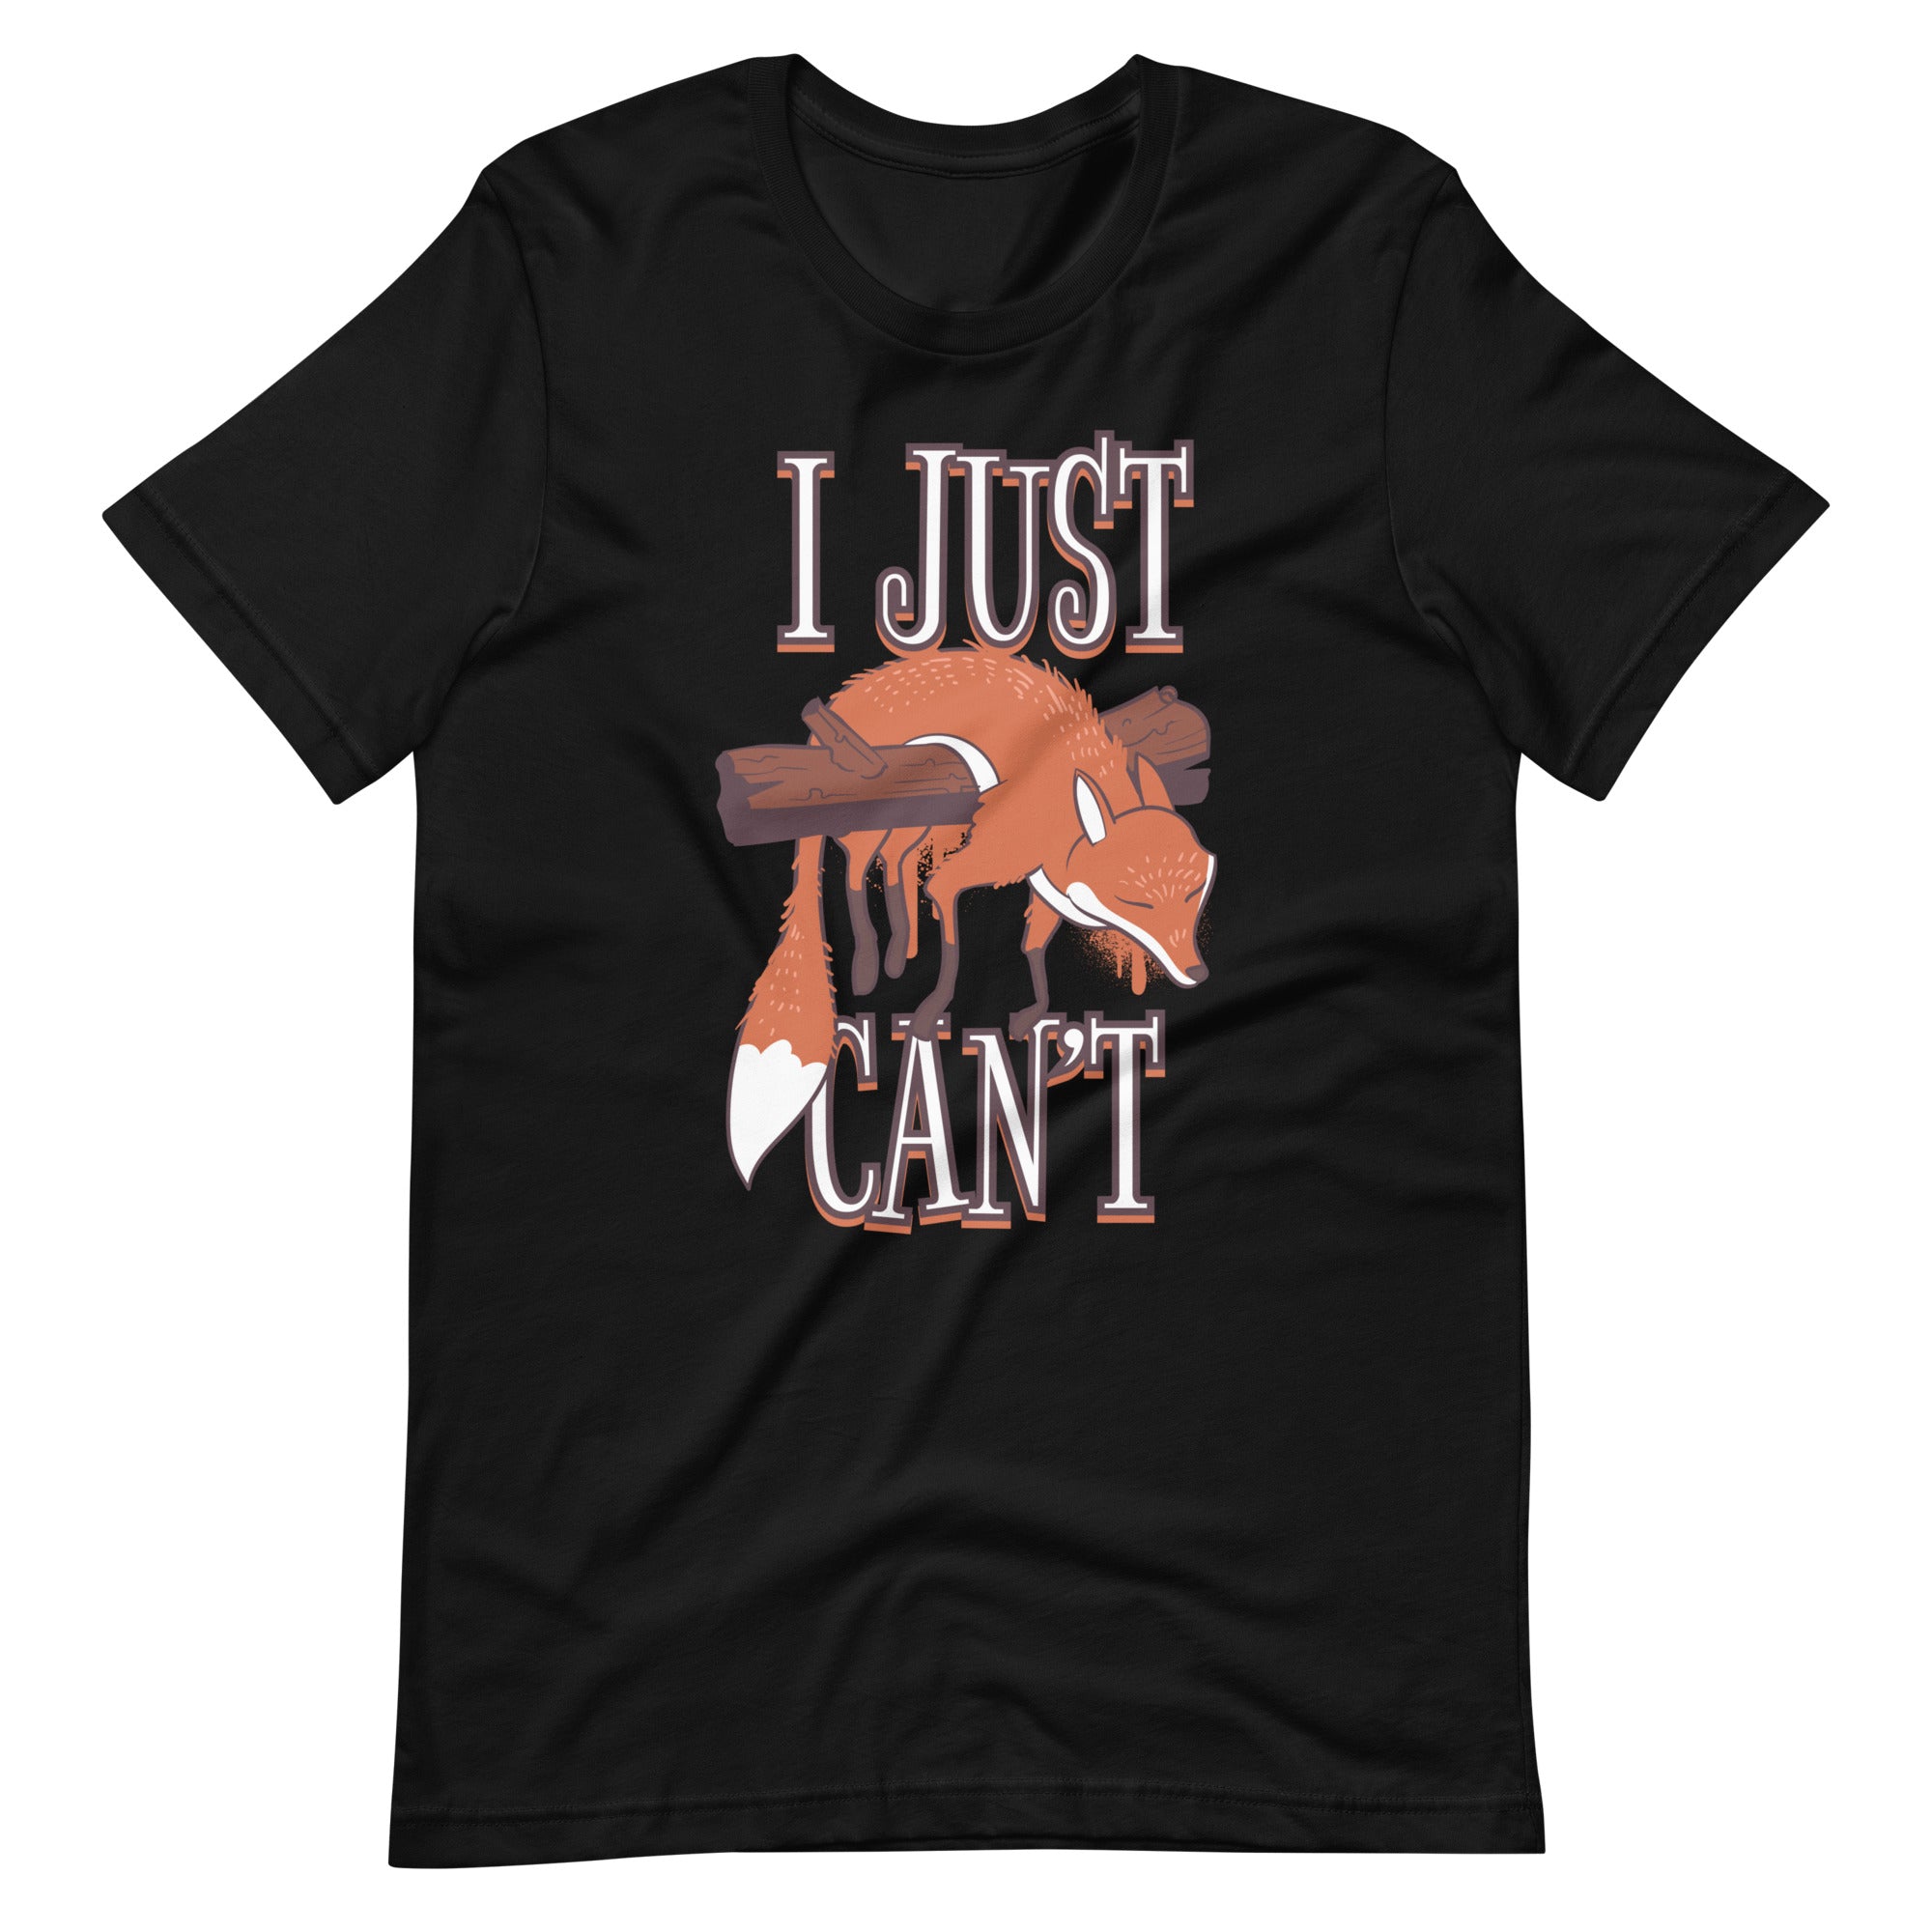 I Just Can't Unisex T-shirt - ZKGEAR